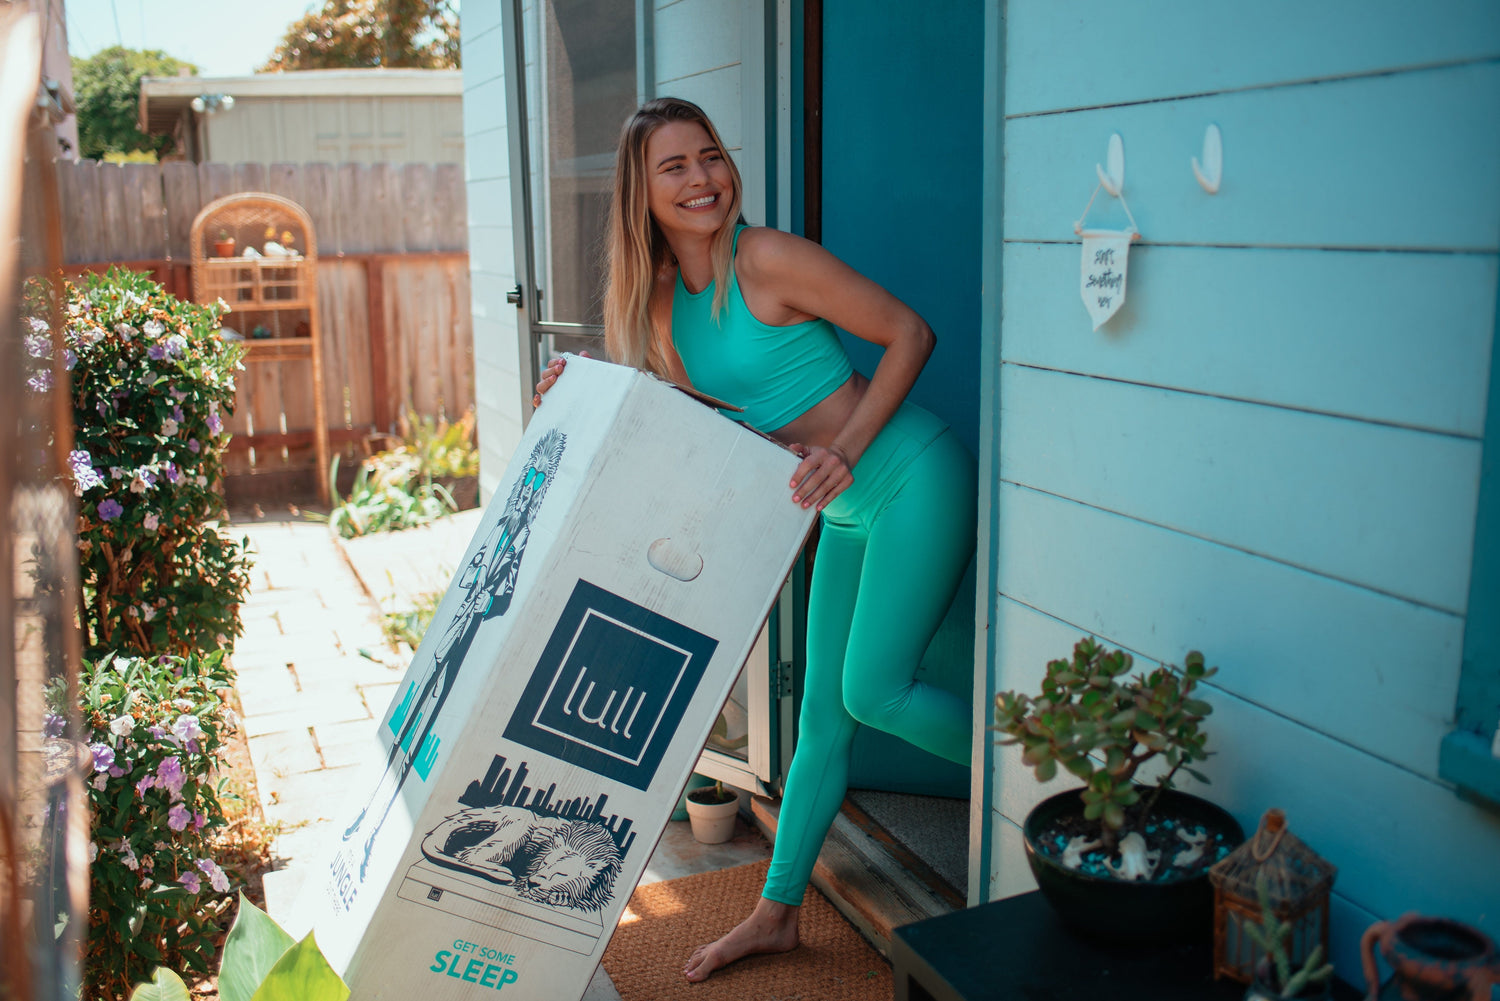 A woman in workout attire smiling while she drags a lull mattress in its box through her doorway.